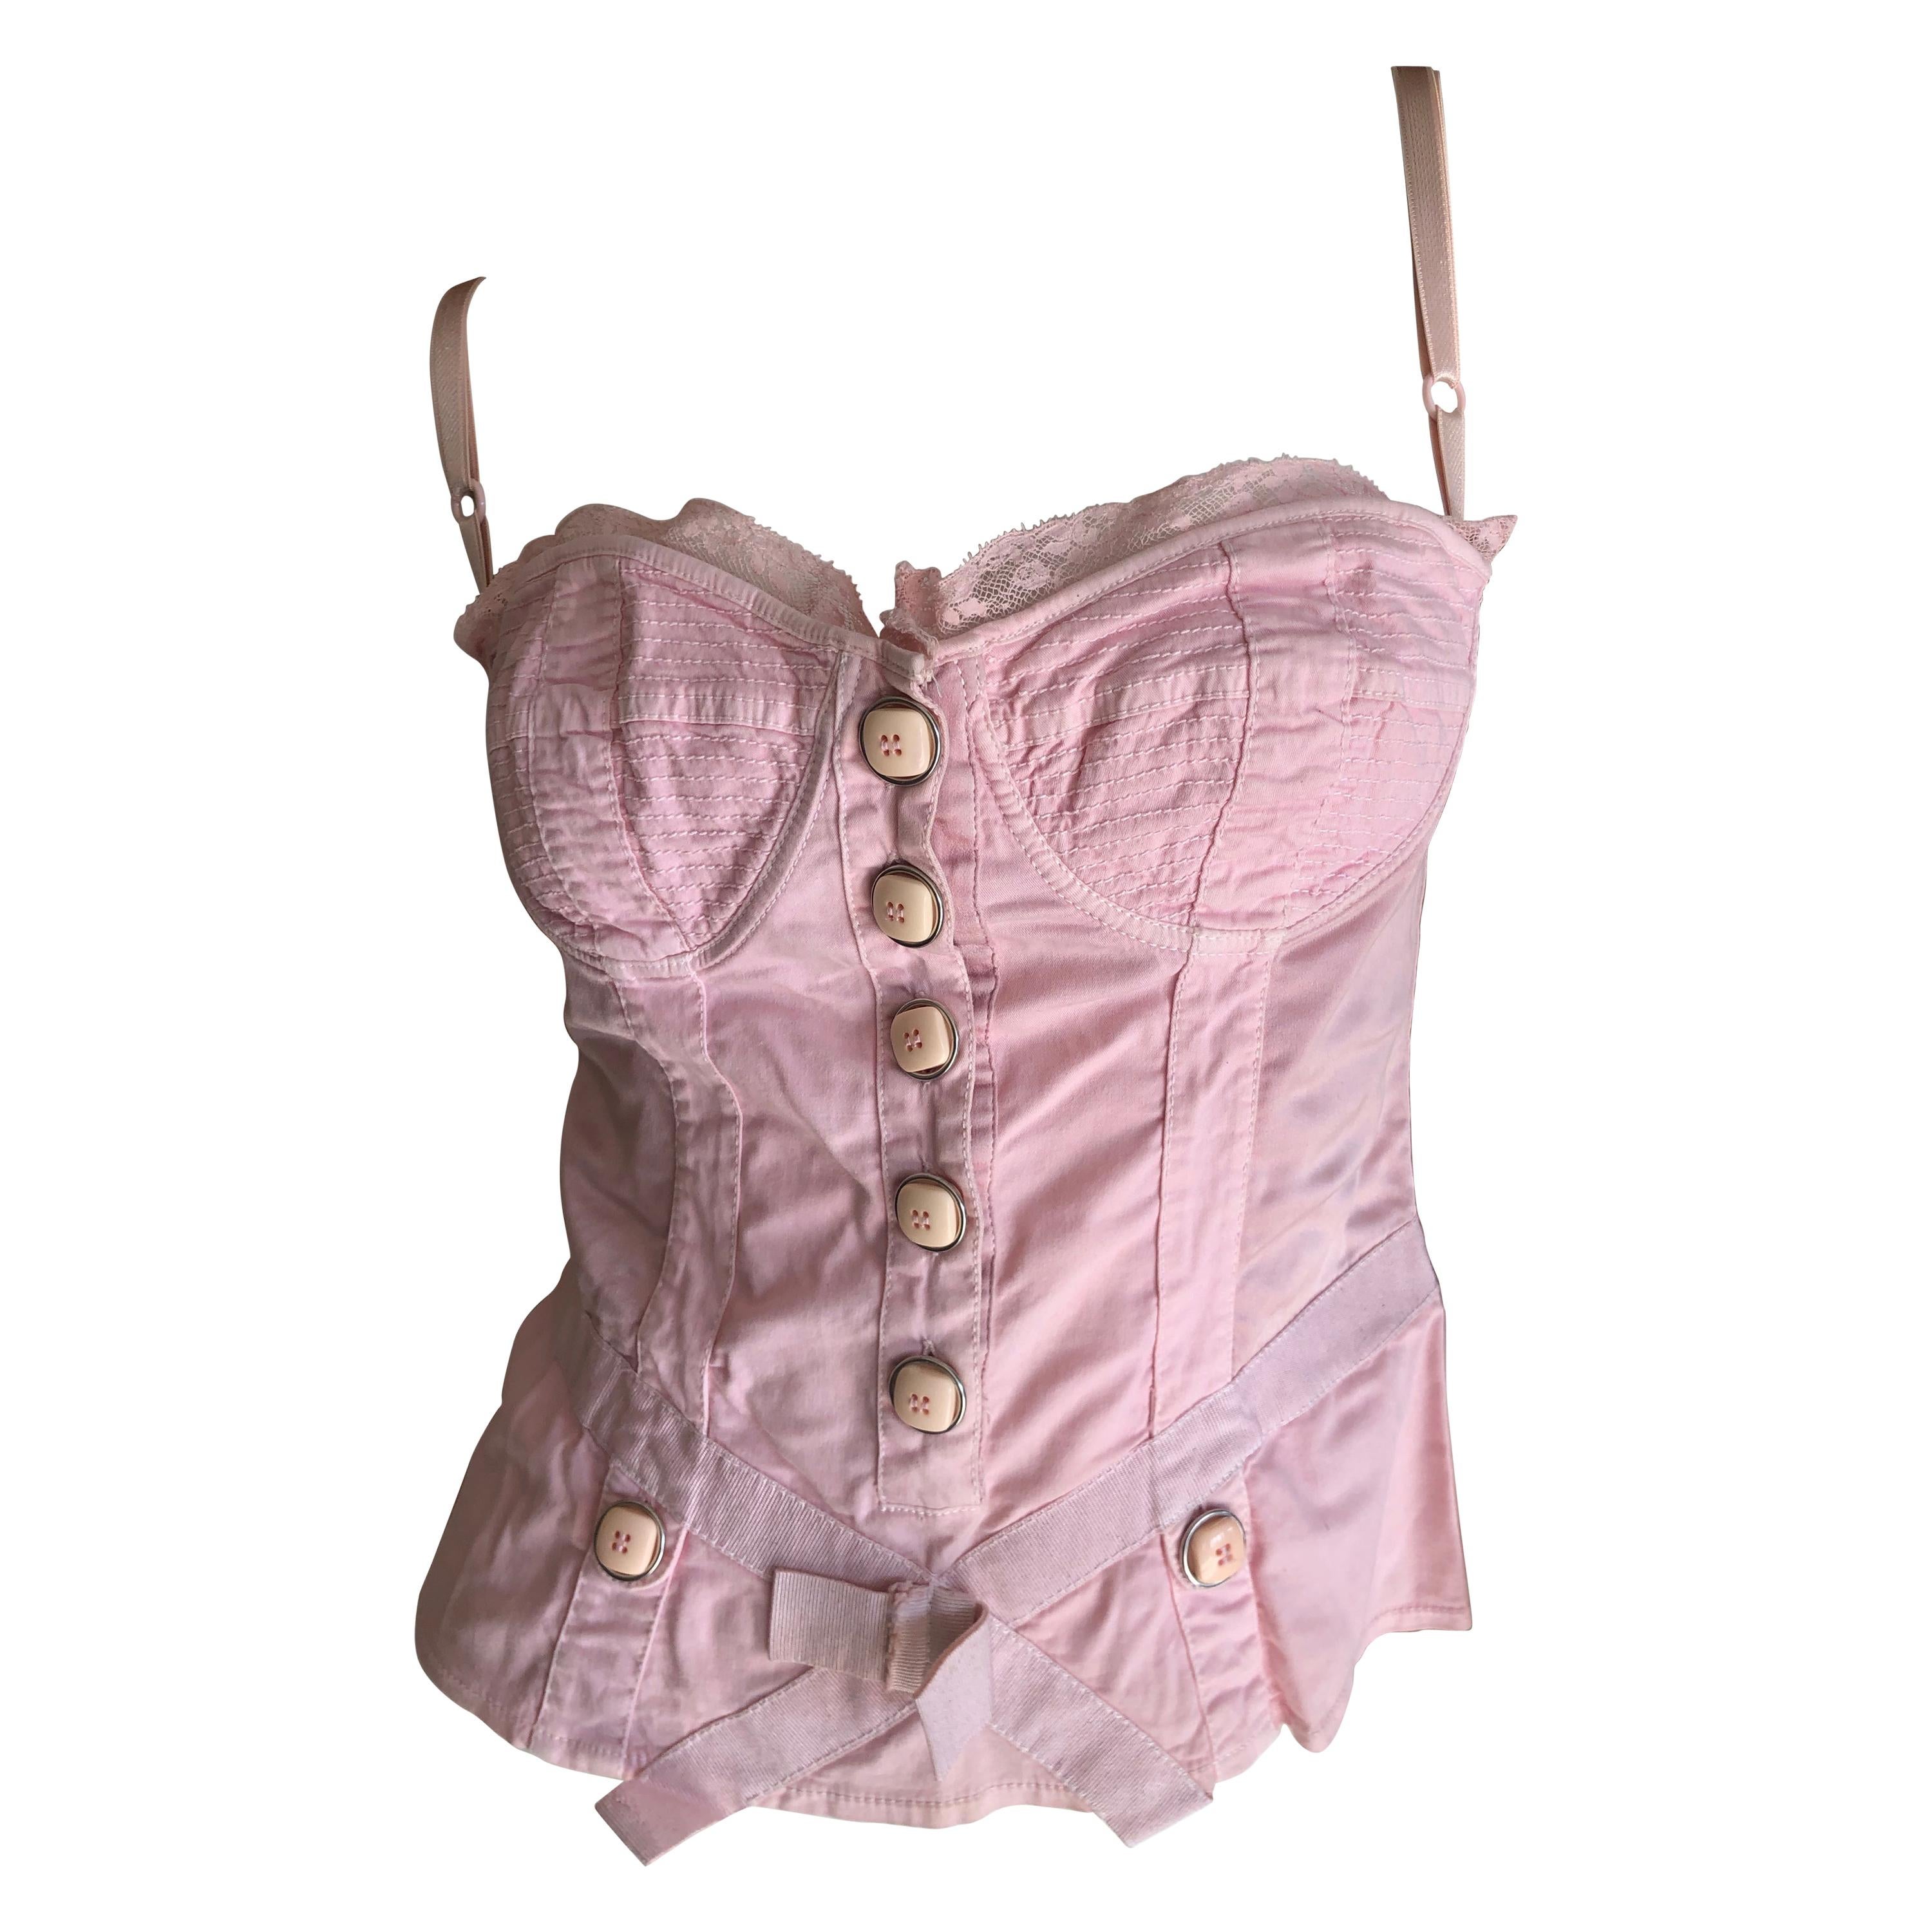 D&G Dolce & Gabbana Vintage Pink Corset with Large Buttons For Sale